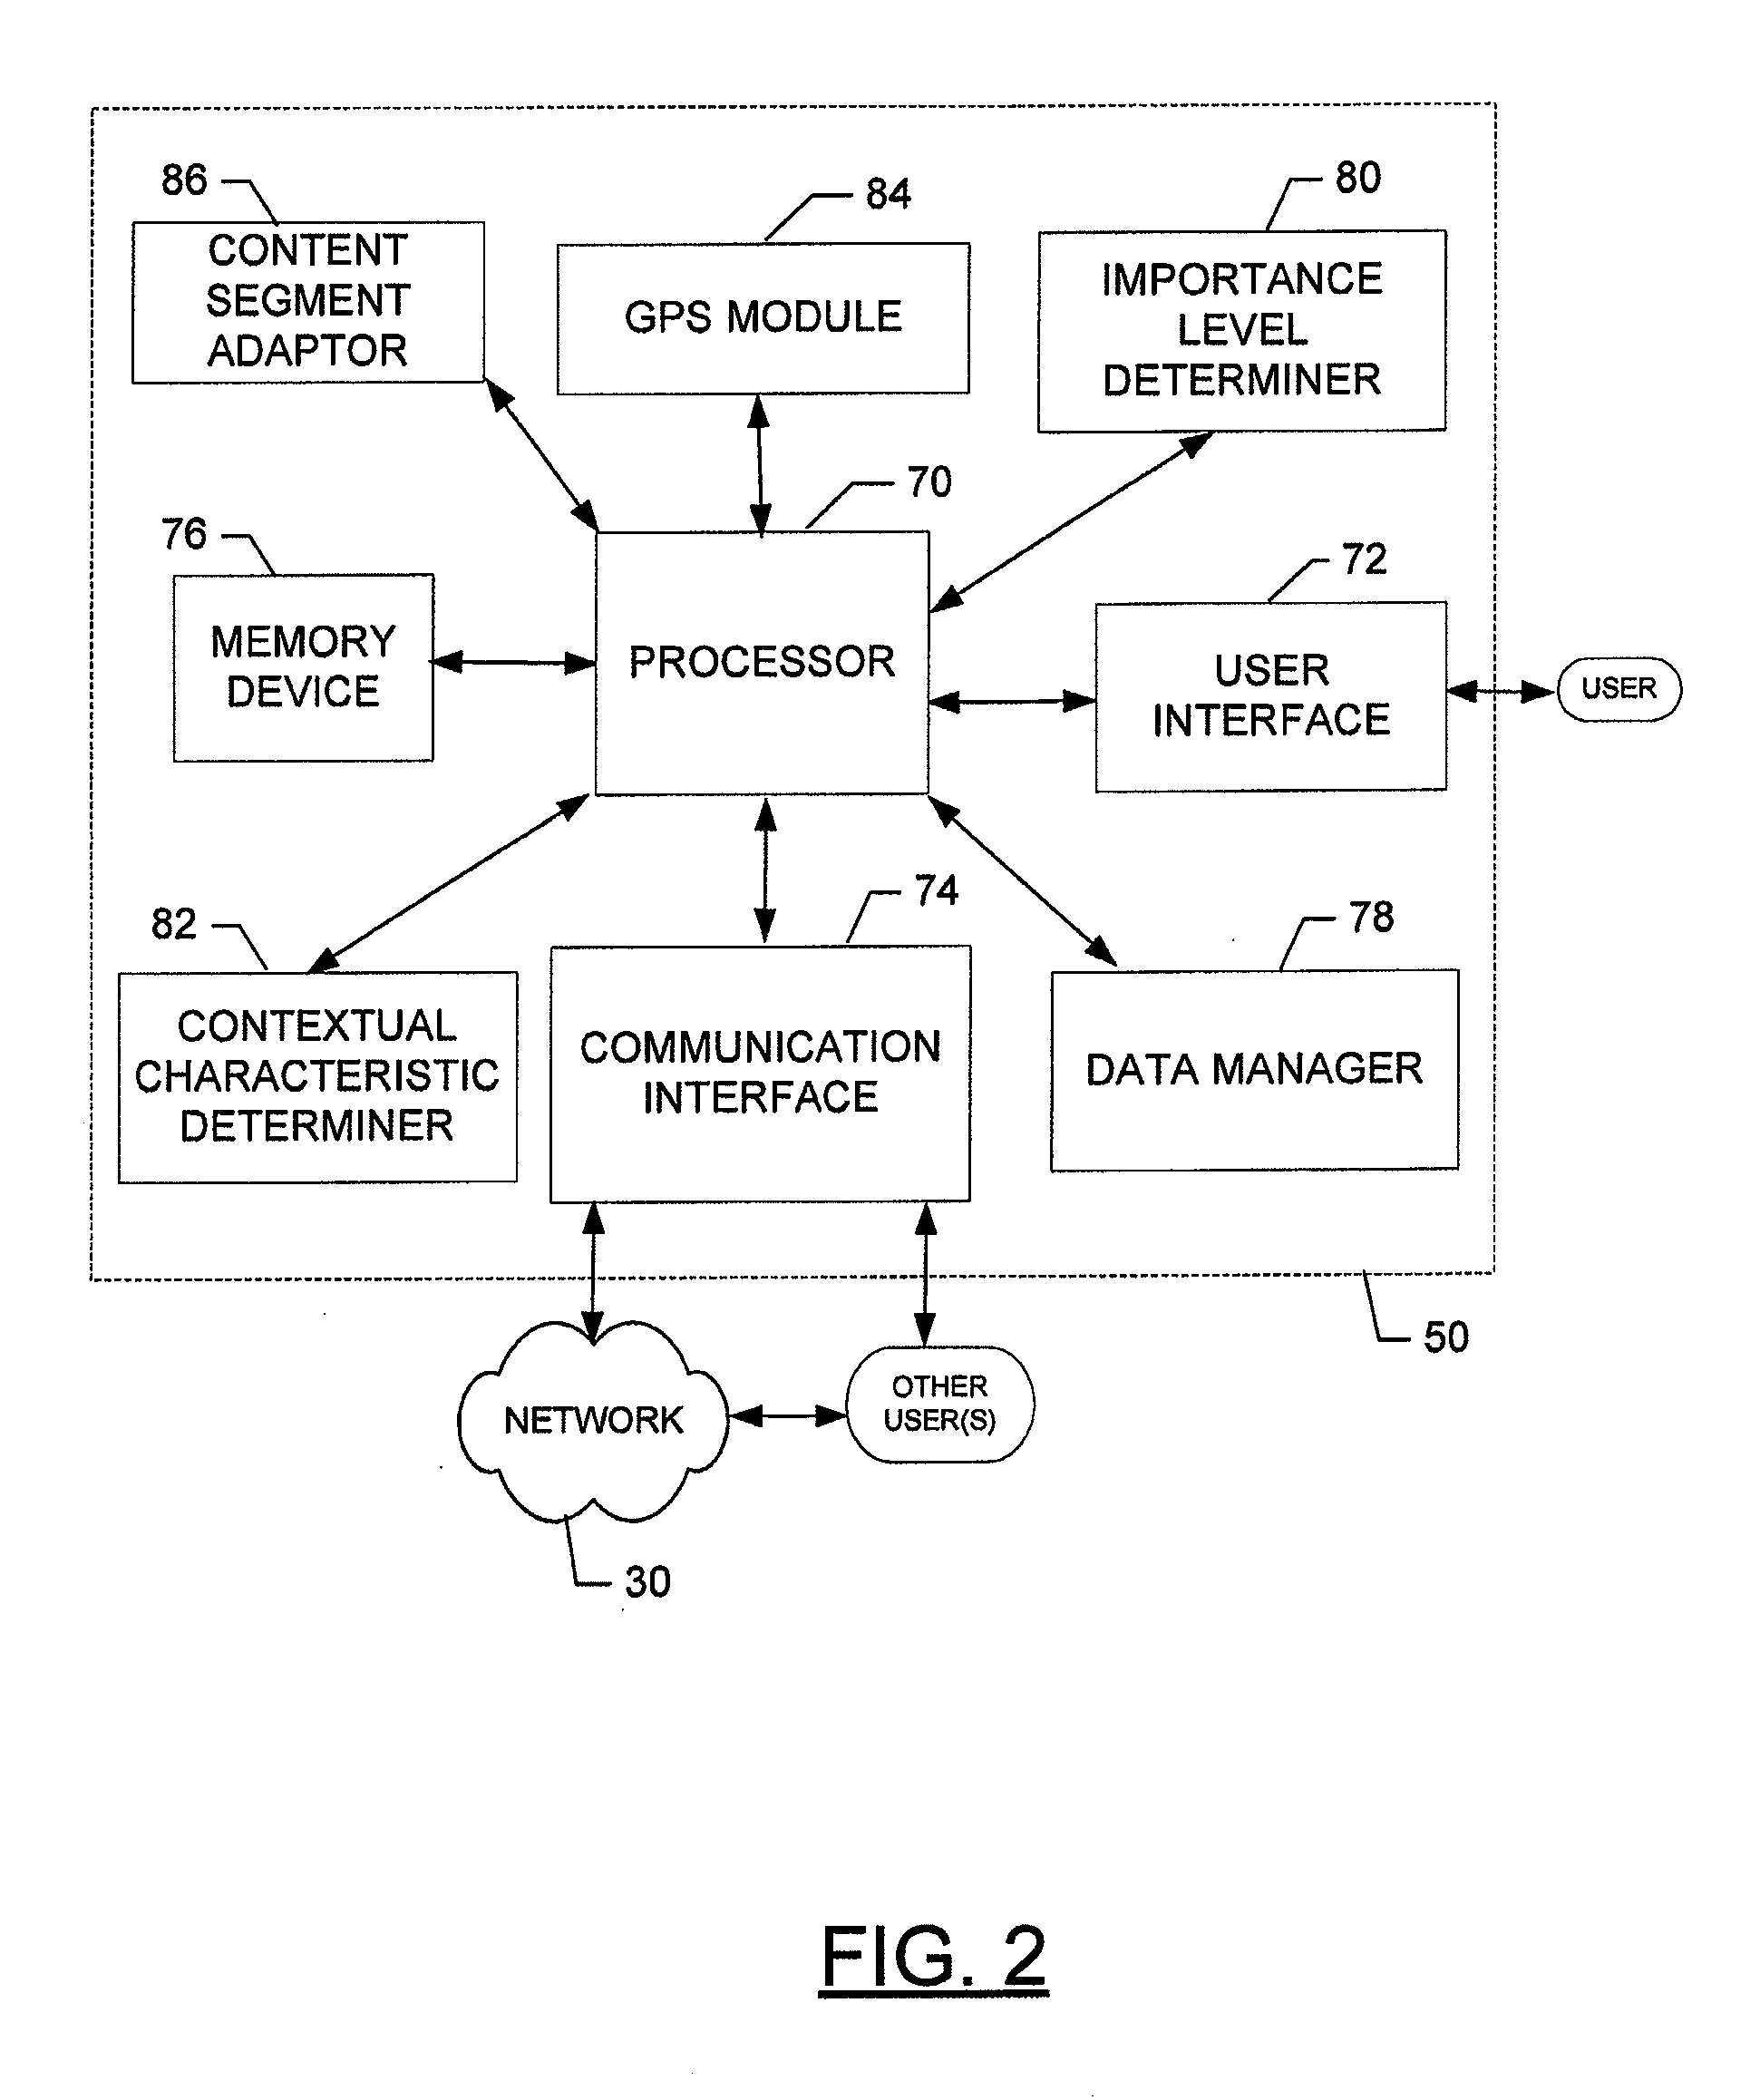 Method, apparatus, and computer program product for adapting a content segment based on an importance level